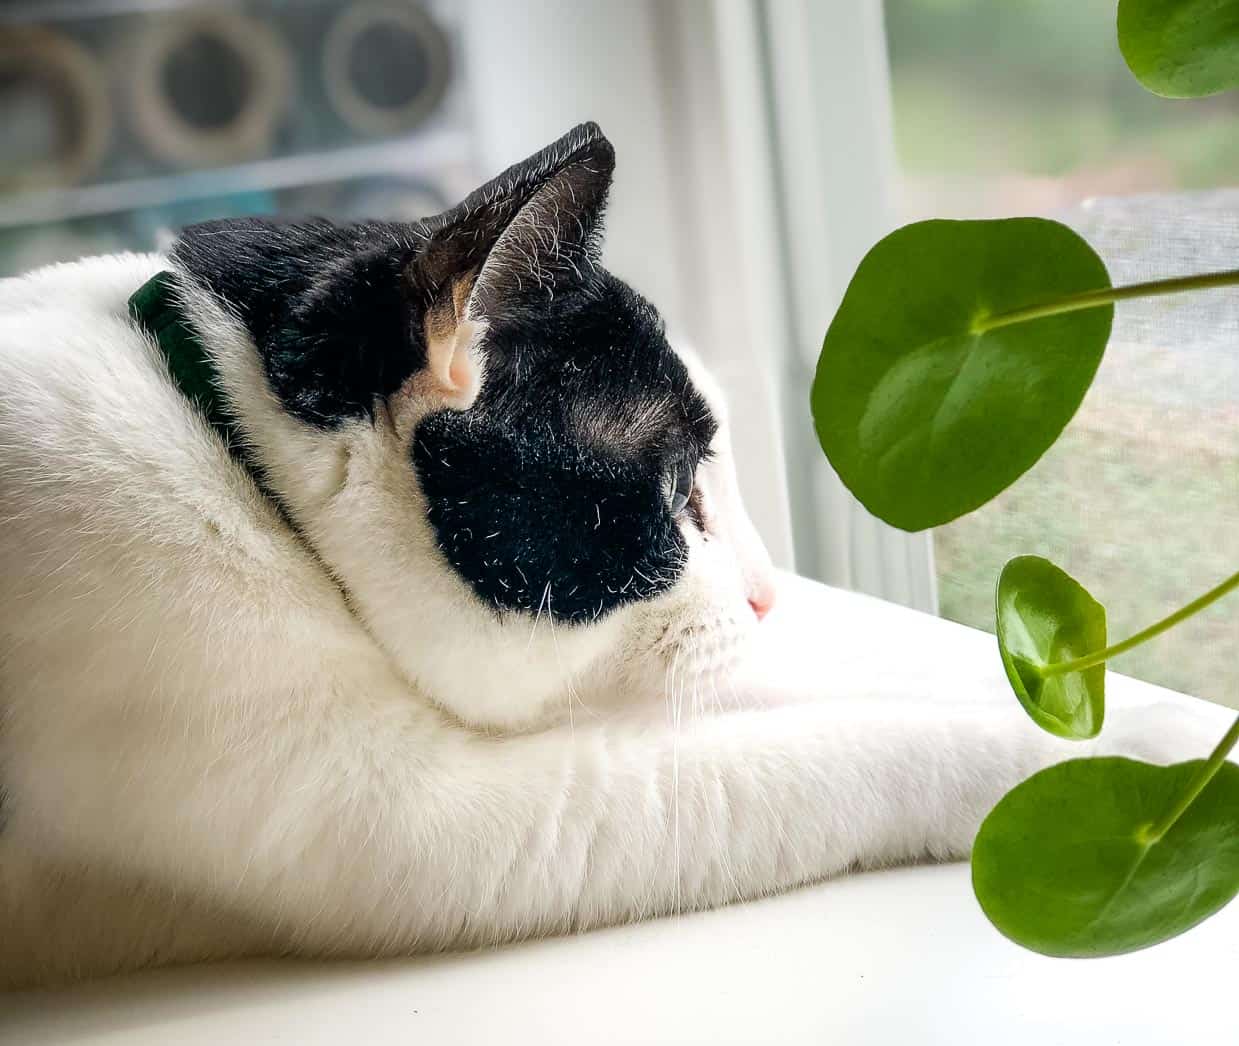 Cat by a plant.